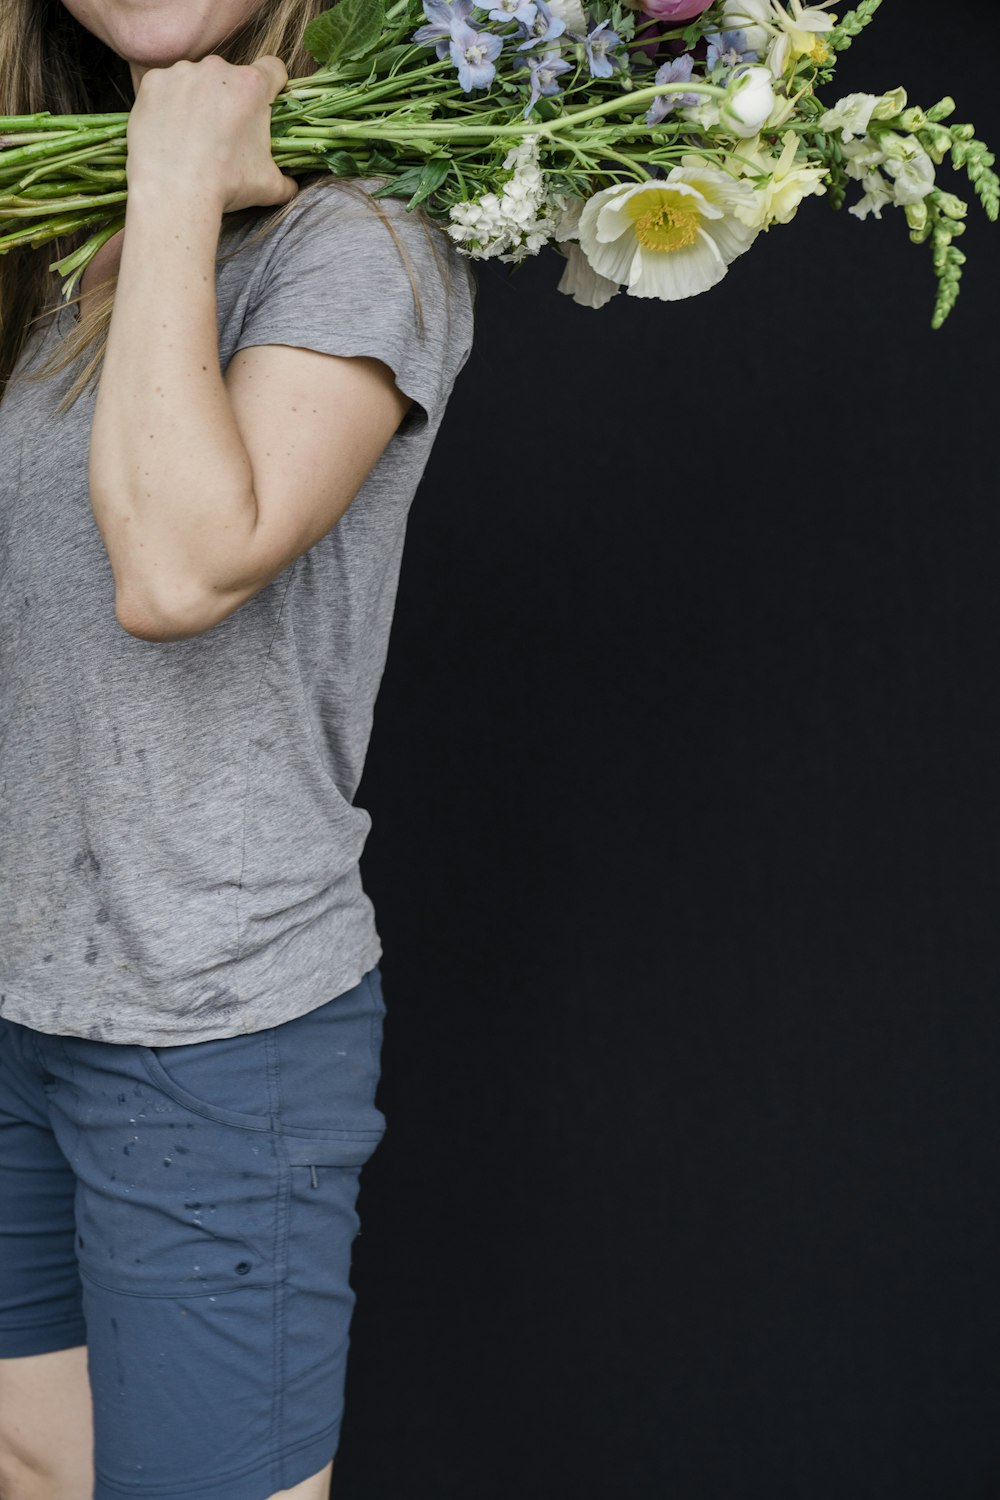 woman in gray t-shirt and blue denim jeans